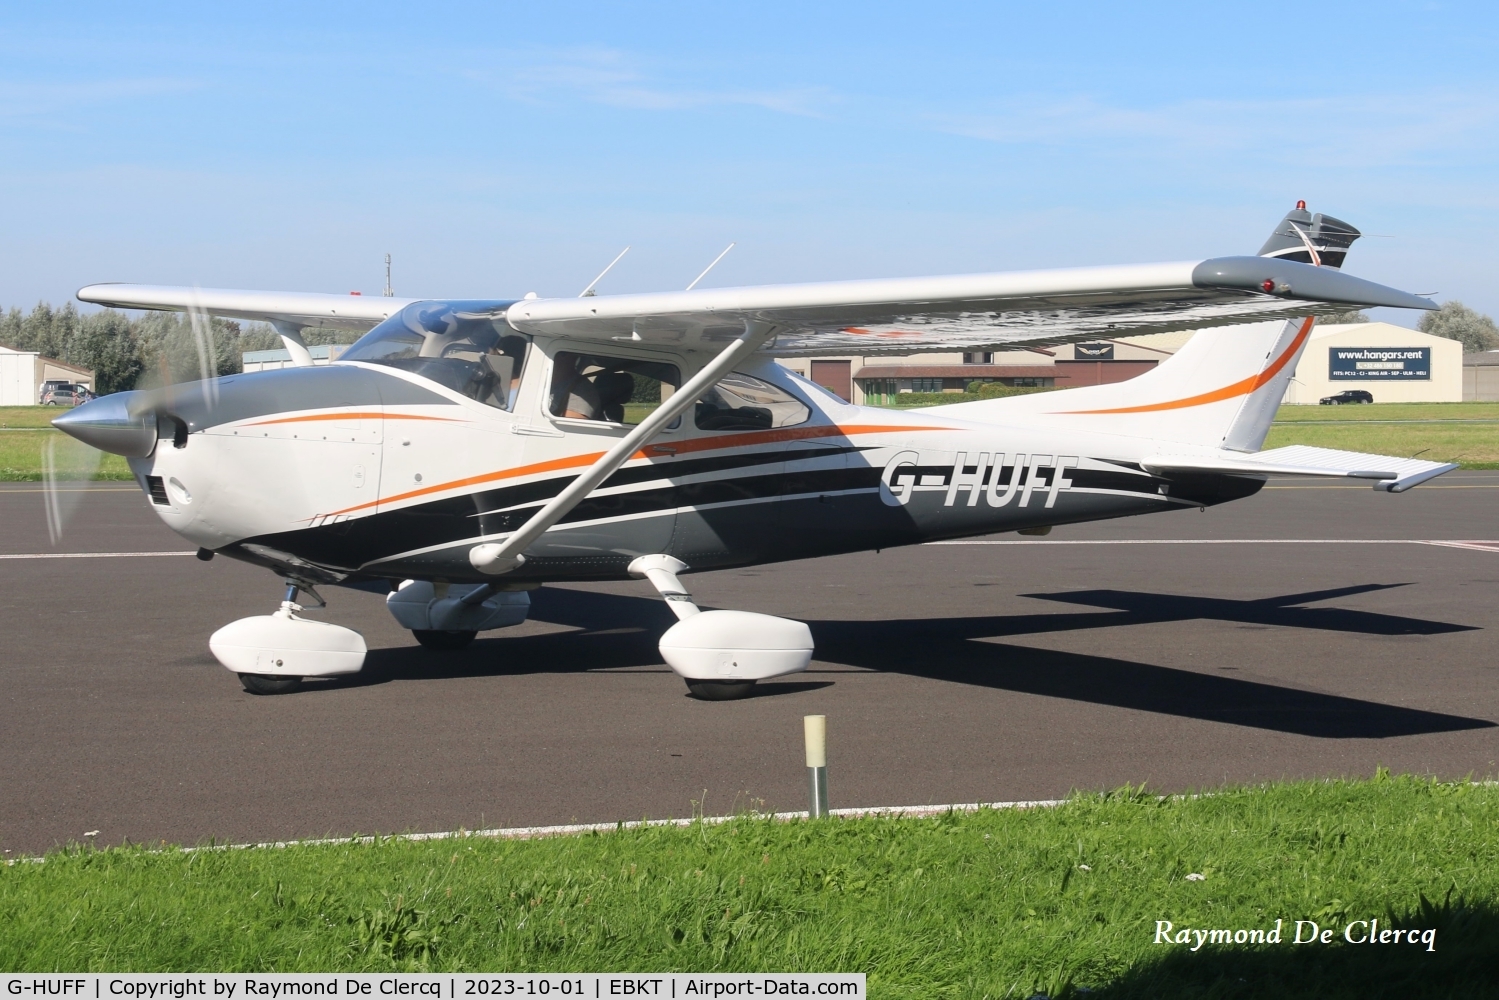 G-HUFF, 1975 Cessna 182P Skylane C/N 182-64076, G-HUFF with new color scheme at Kortrijk Airport.